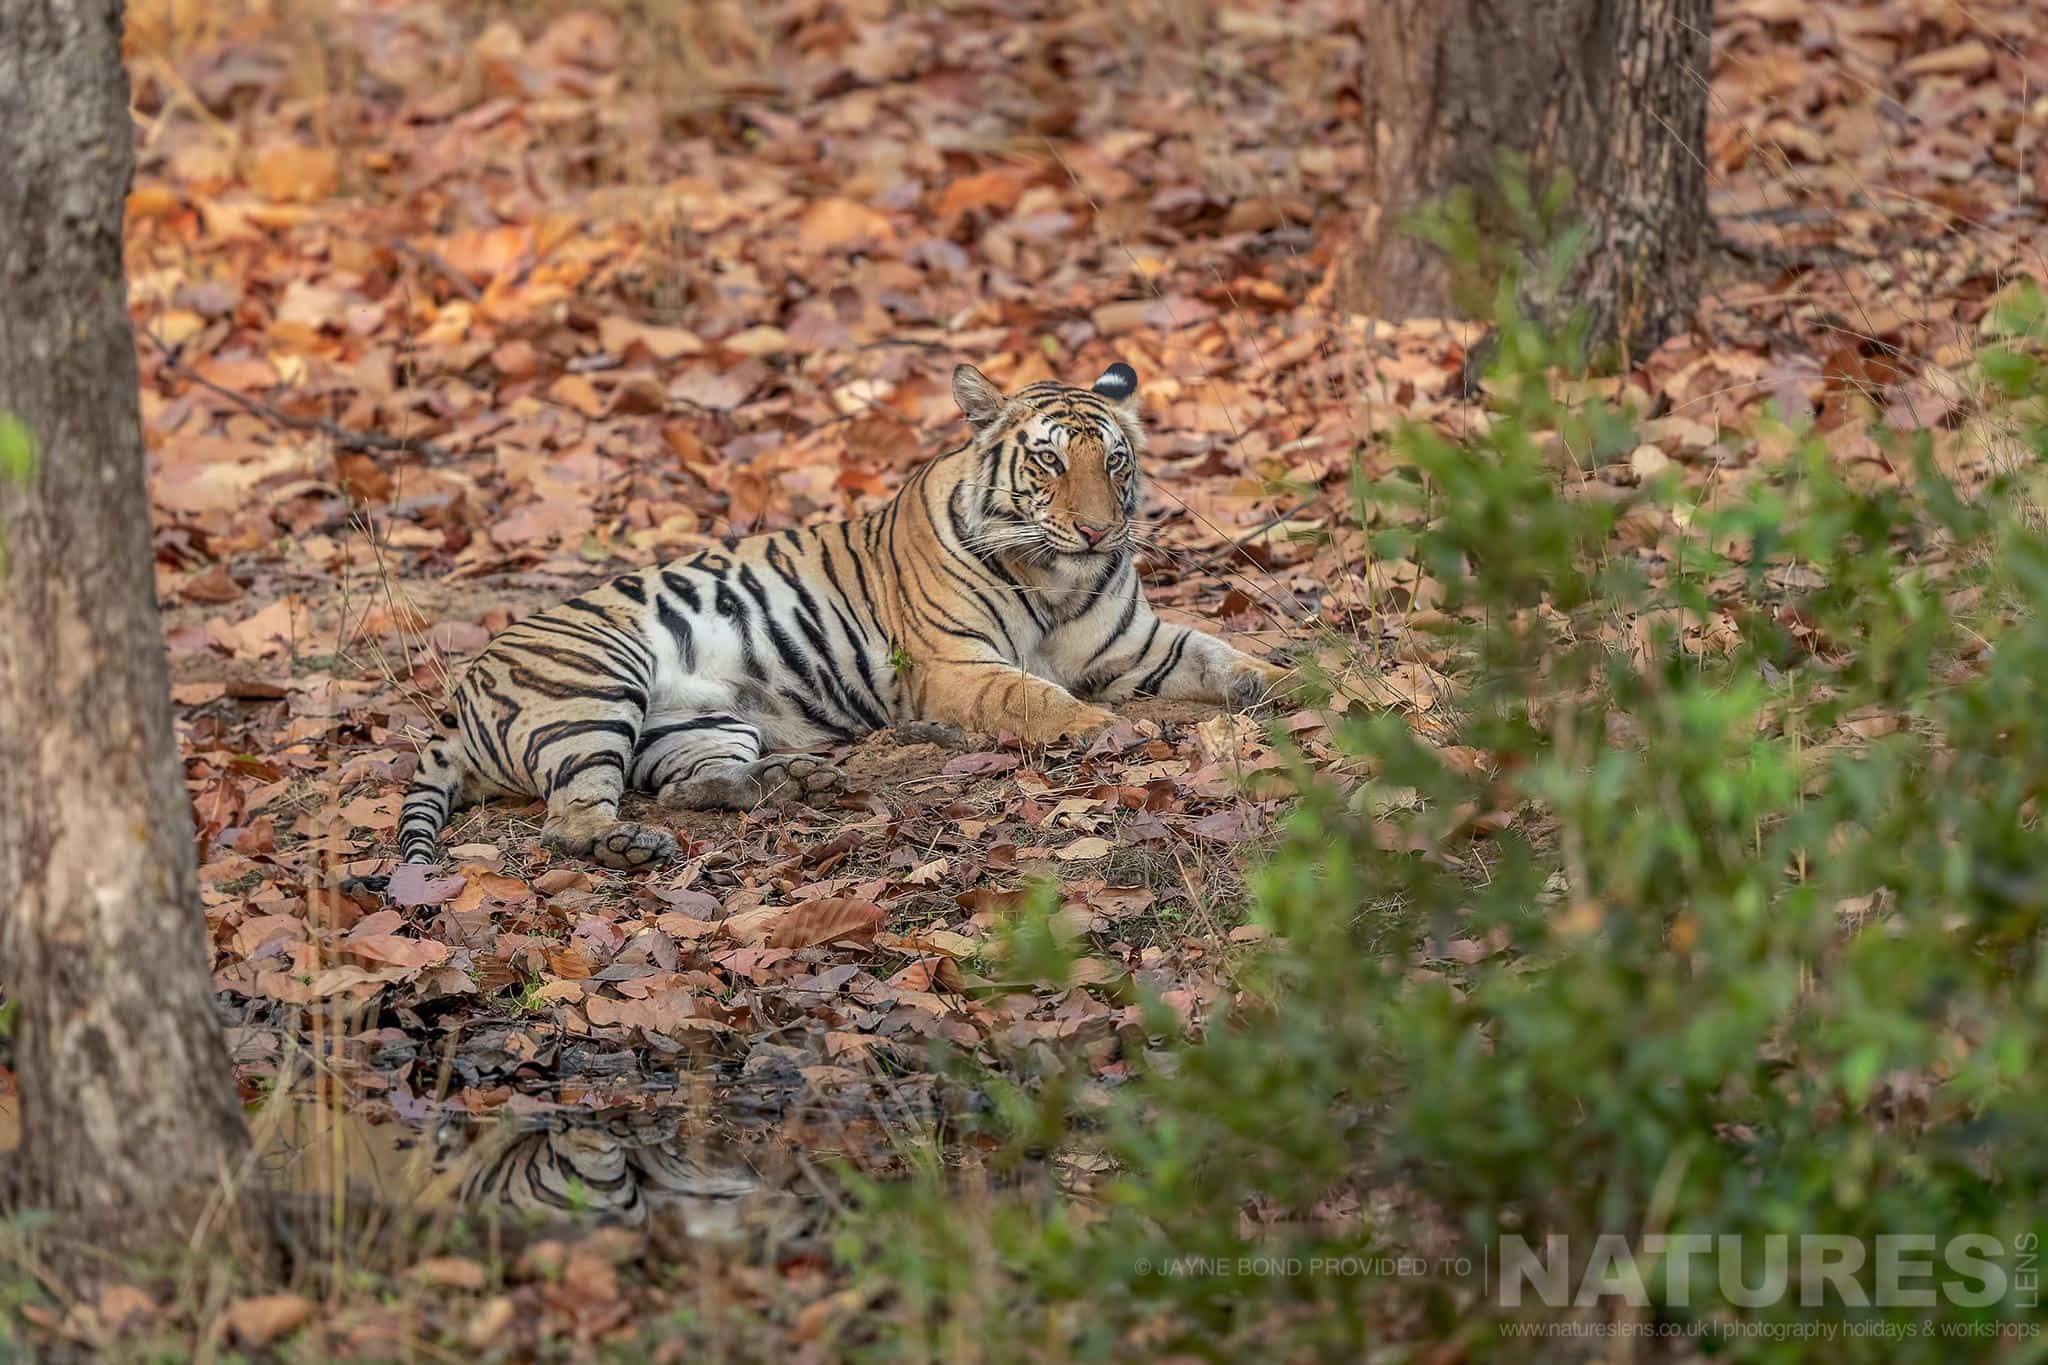 One of Bandhavgarhs tigers relaxes in a leaf strewn area of shade photographed during the NaturesLens India’s Bengal Tigers of Bandhavgarh Photography Holiday